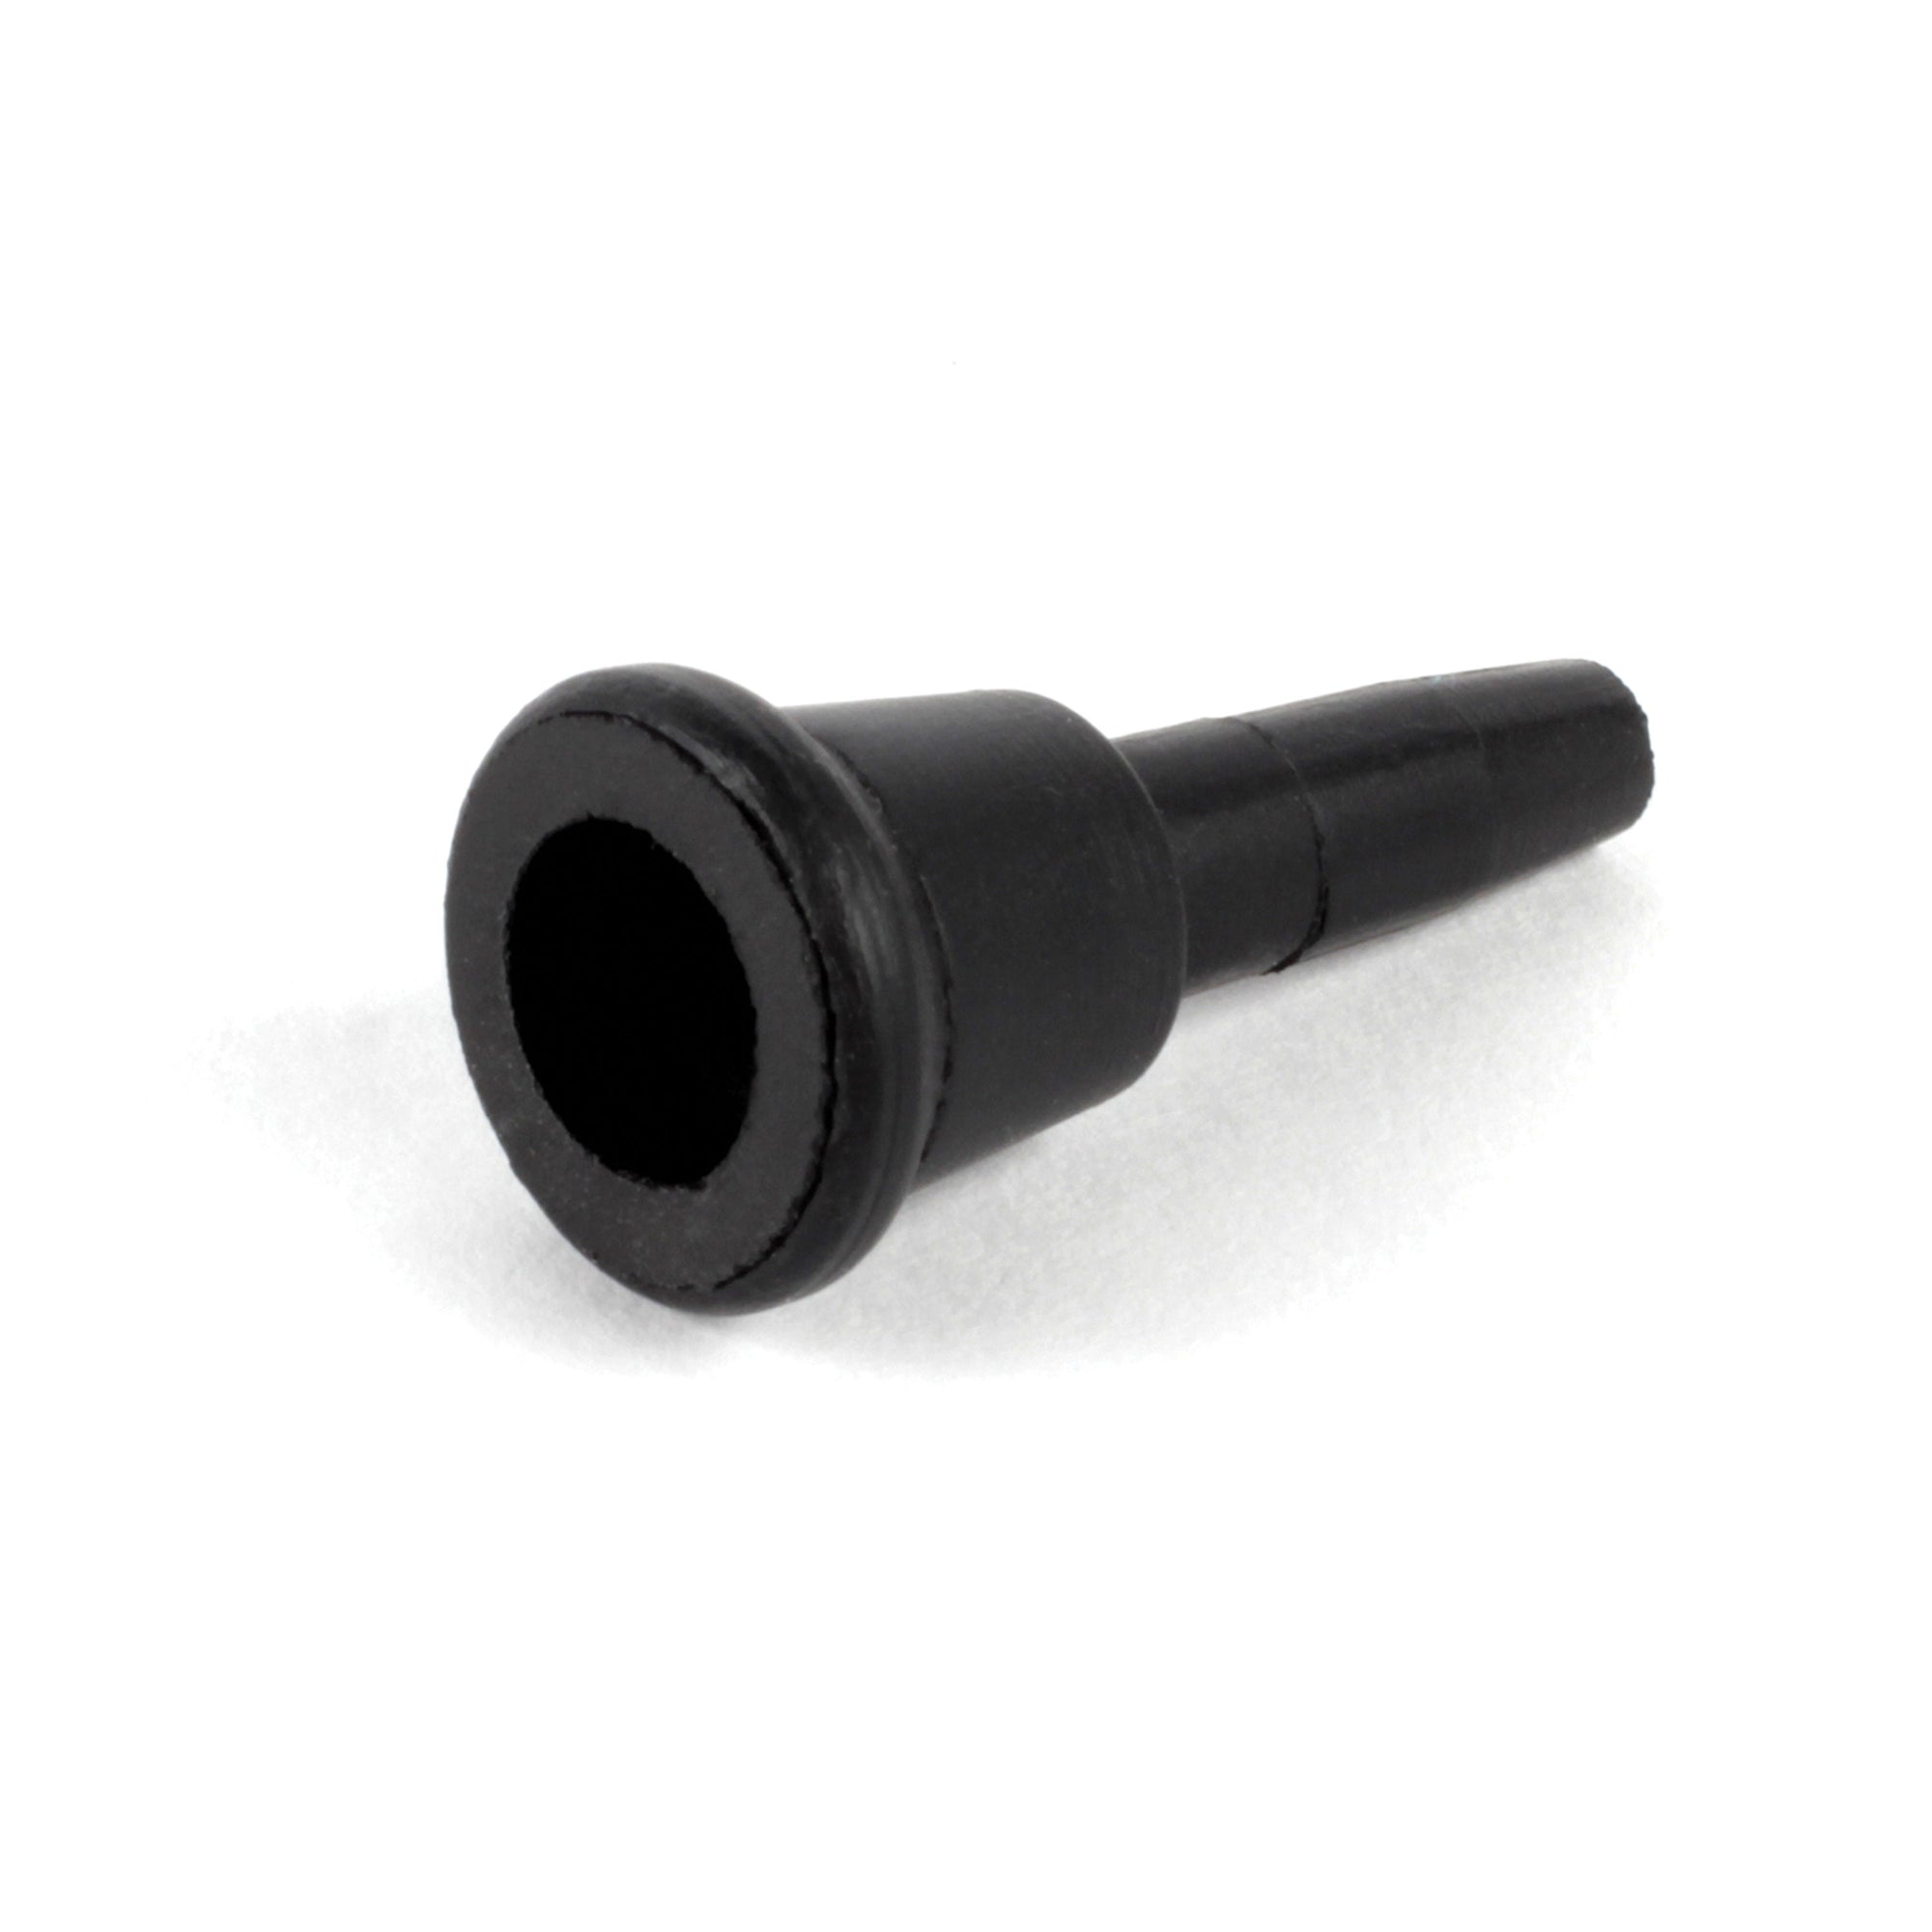 Camco 10399 Tapered Nipple For Gas Pressure